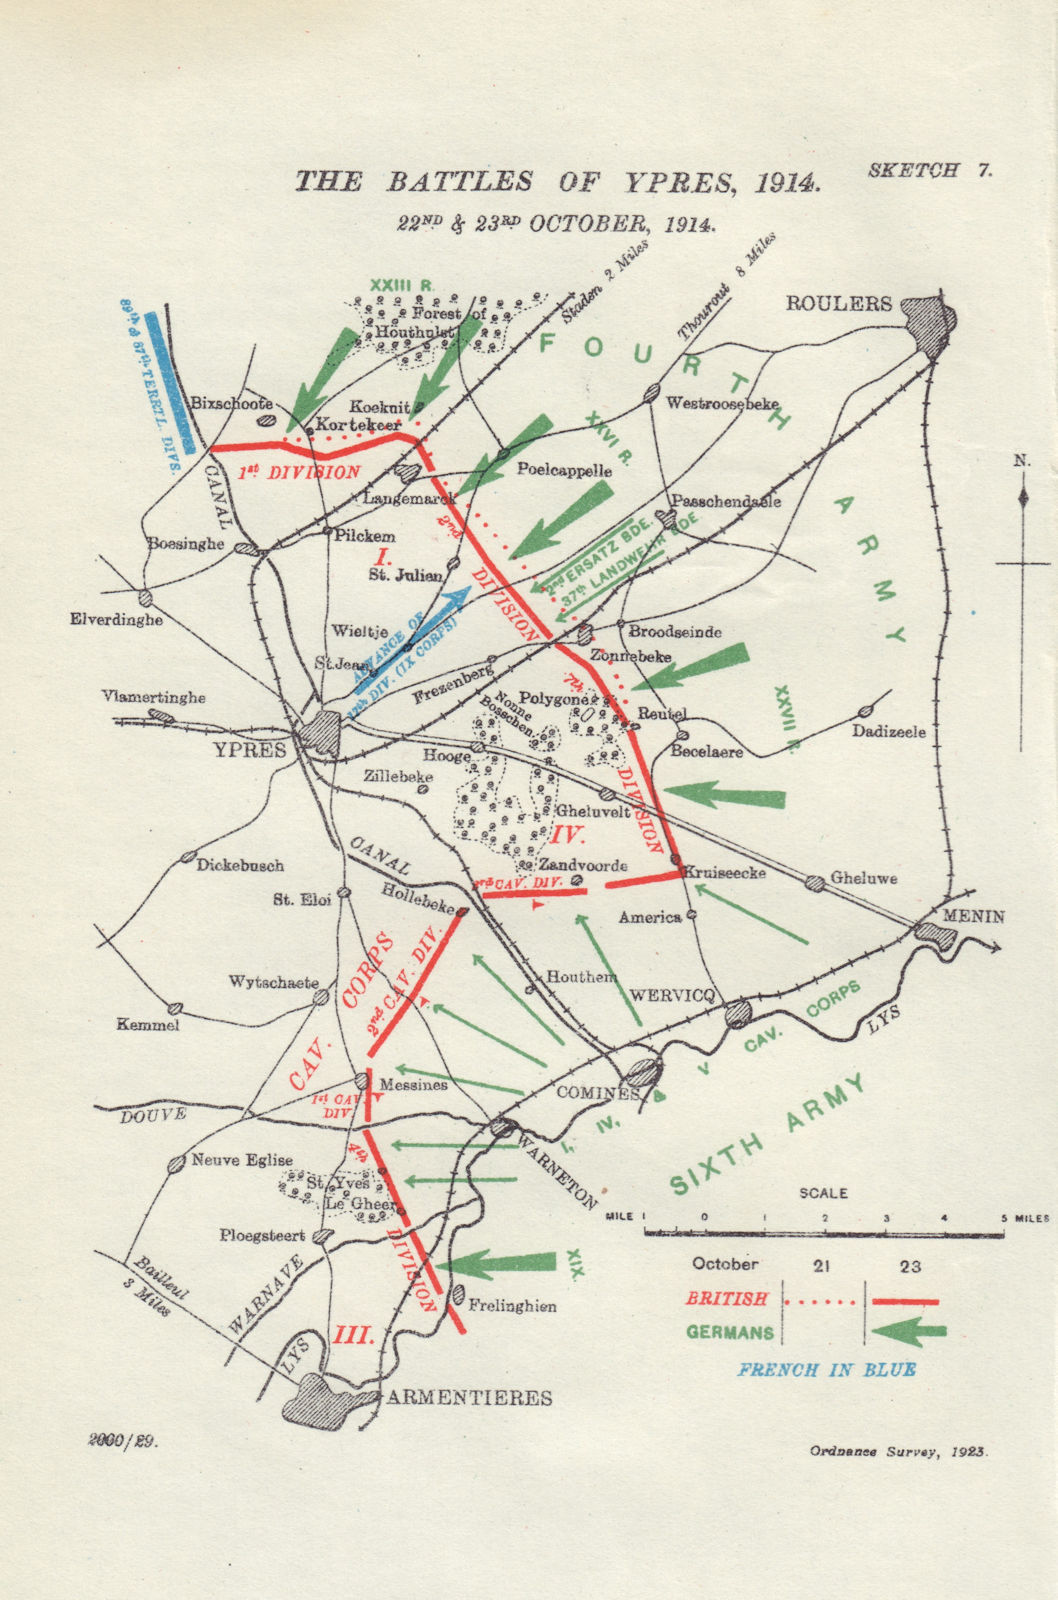 Associate Product Battle of Ypres, 22nd & 23rd October, 1914. First World War. 1925 old map